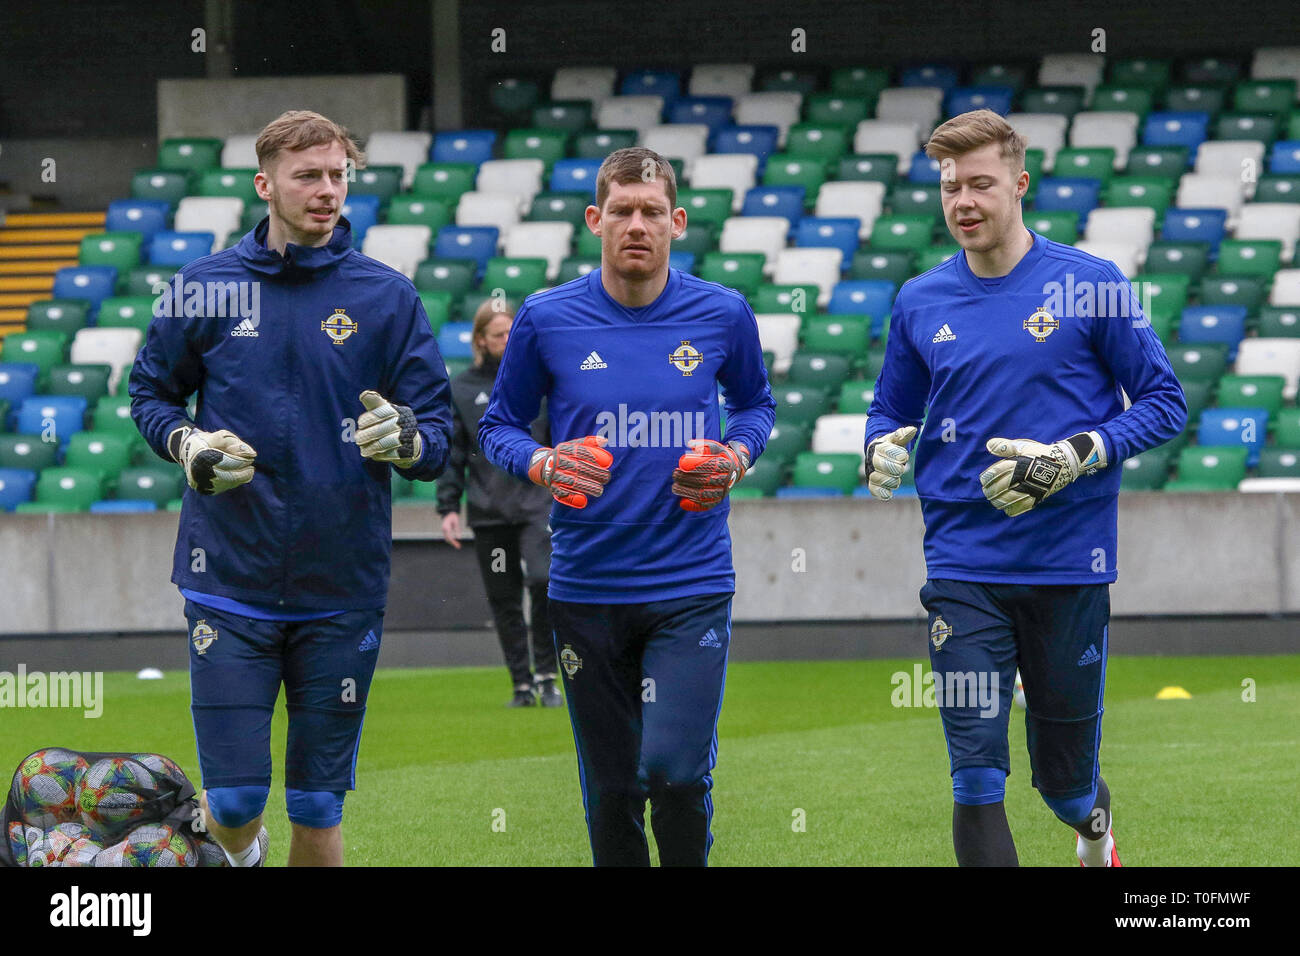 Windsor Park, Belfast, Northern Ireland.20 March 2019. Northern Ireland training in Belfast this morning ahead of their UEFA EURO 2020 Qualifier against Estonia tomorrow night in the stadium. Northern Ireland goalkeepers in training - Conor Hazard, Michael McGovern and Bailey Peacock-Farrell. Credit: David Hunter/Alamy Live News. Stock Photo